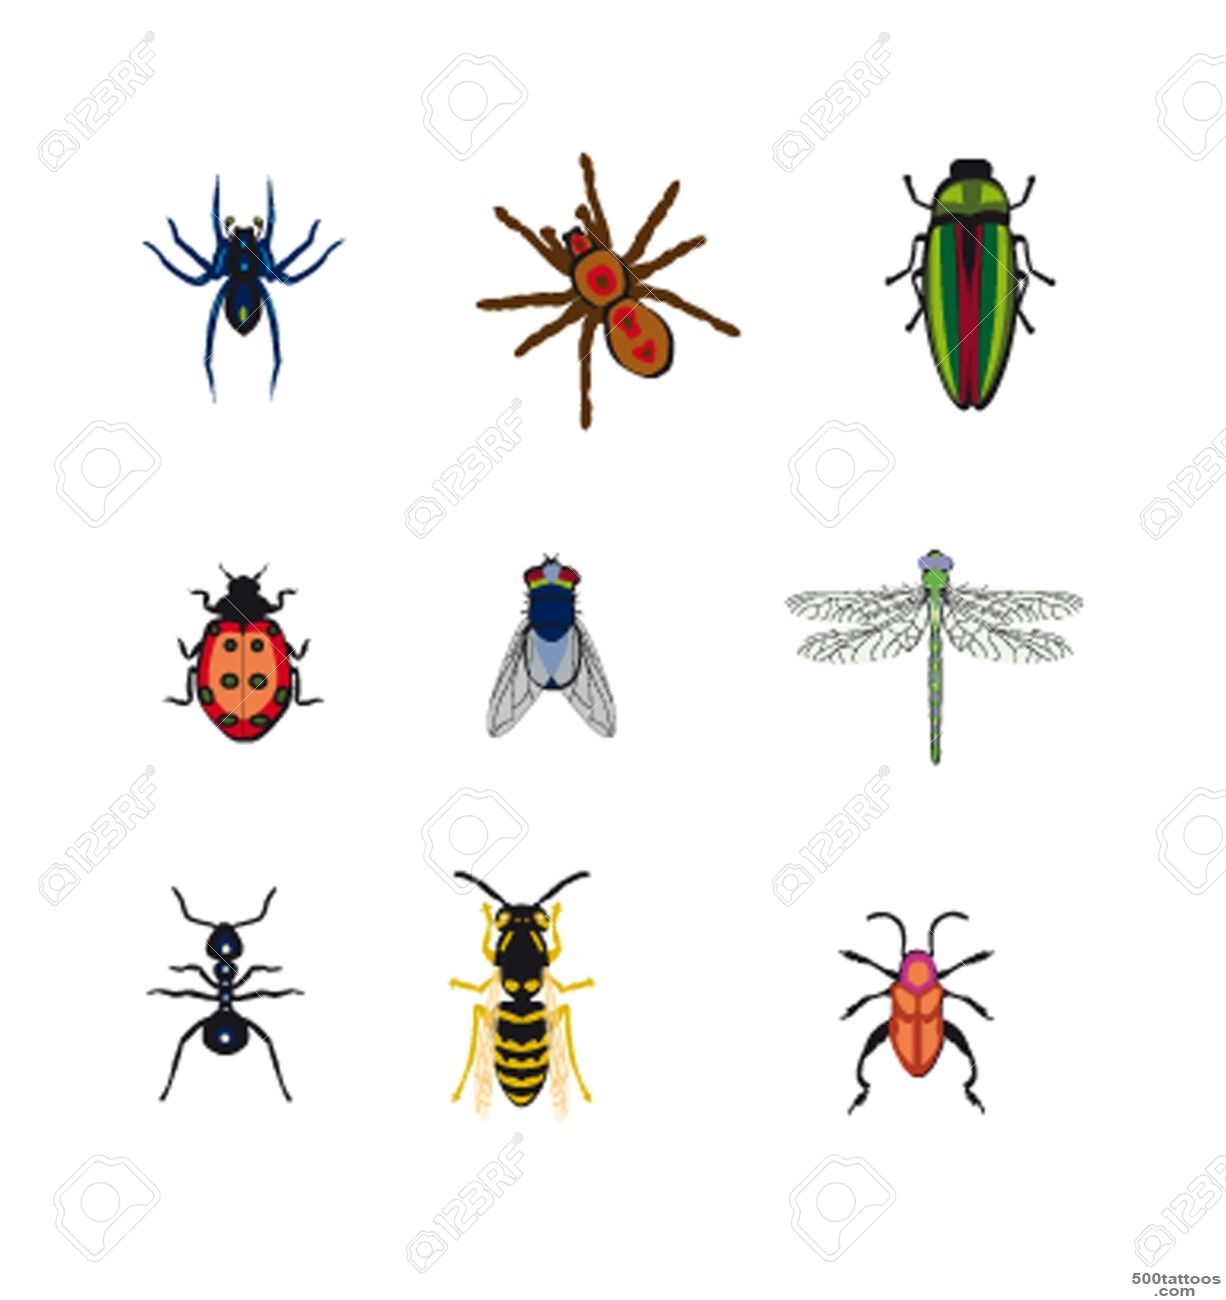 Set The Image Of Vector Insects Royalty Free Cliparts, Vectors ..._21